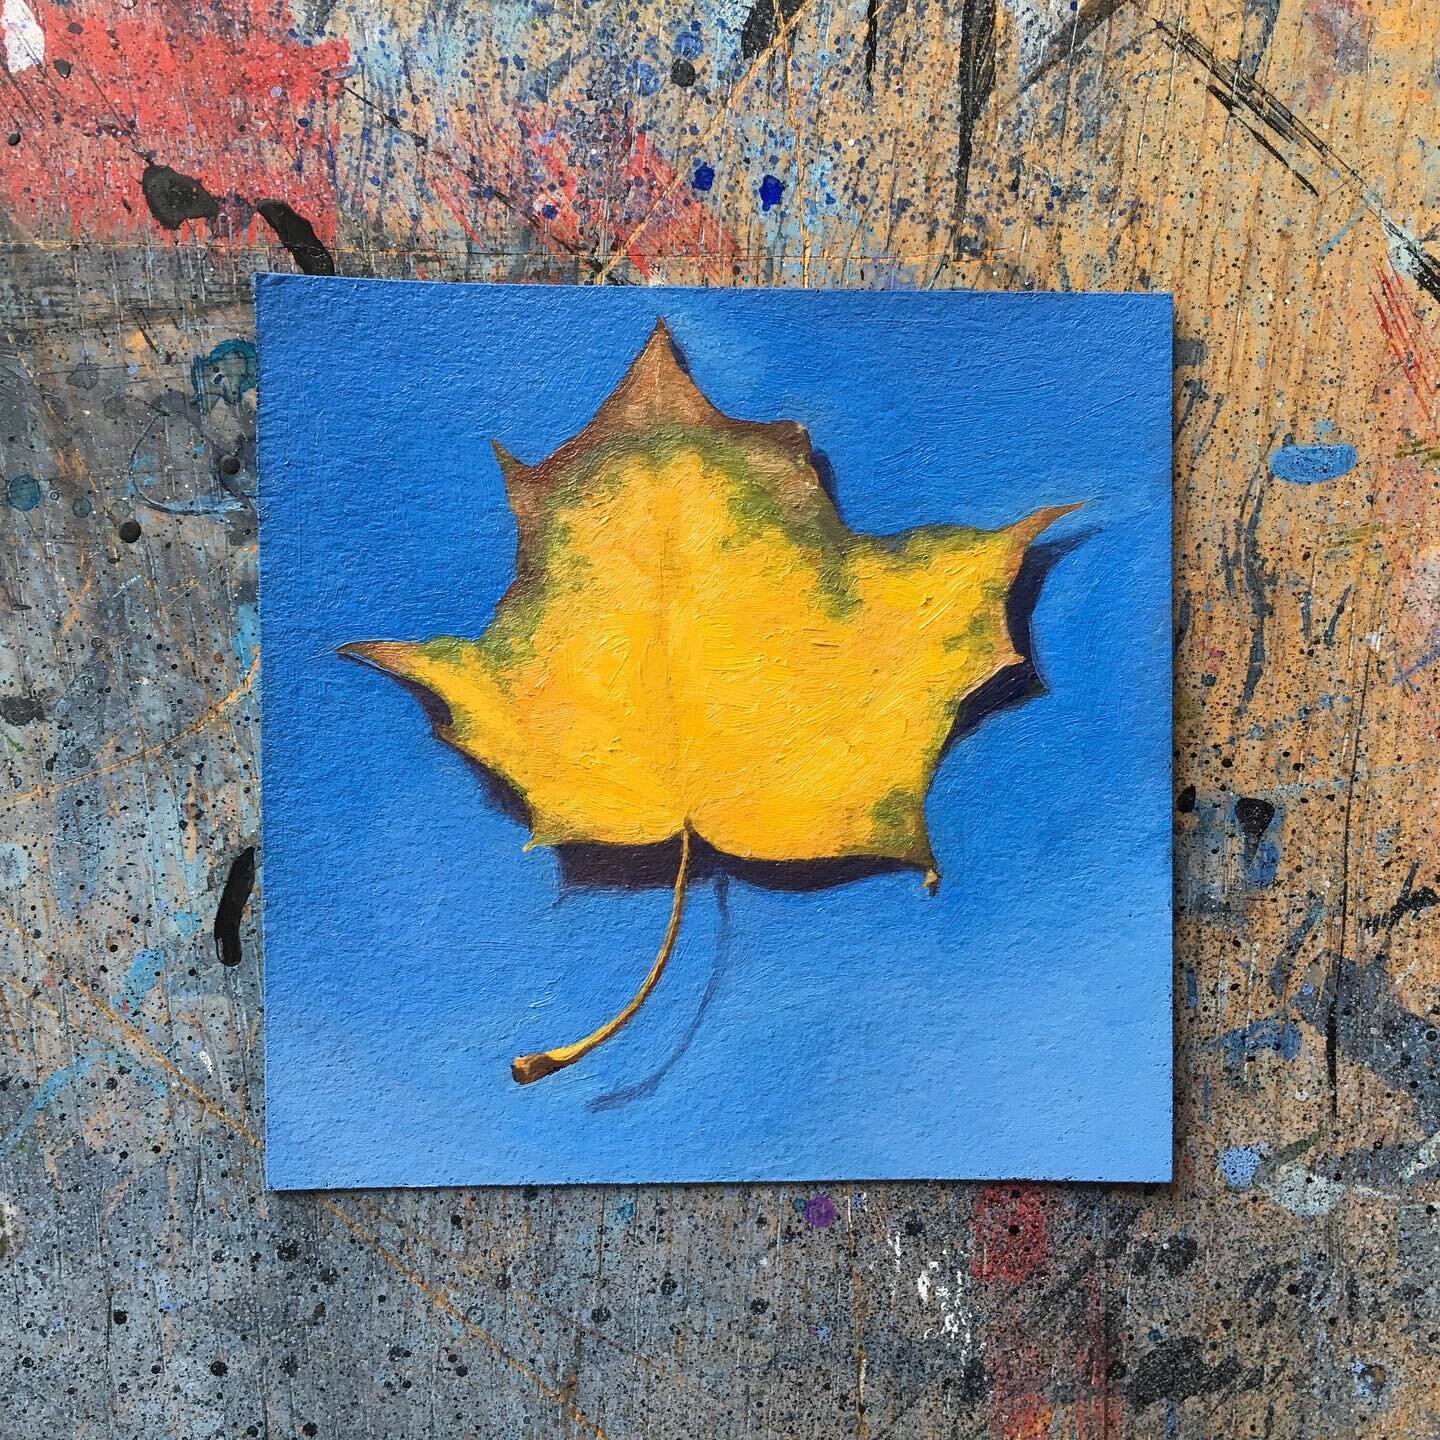 Happy Autumn! 💛🍁
We made it through another summer 😄

#autumn #fall #firstdayofautumn #firstdayoffall #autumnequinox #autumnequinox2022 
#autumnpainting #fallpainting #yellowleaf #painting #canadianpainting #oilonpaper #happiness #art